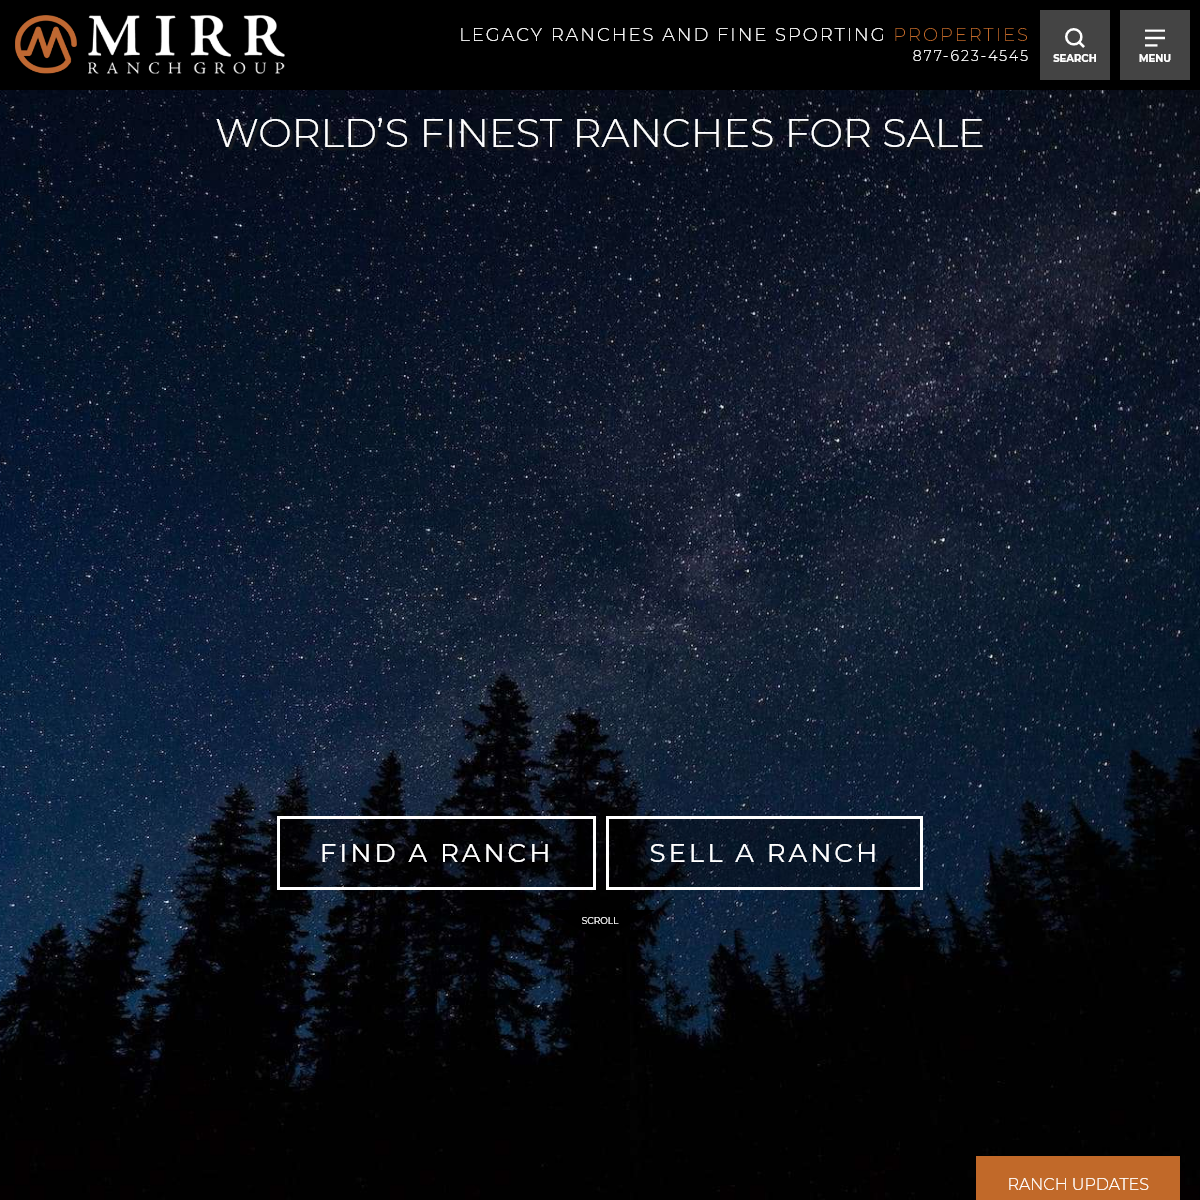 A complete backup of mirrranchgroup.com